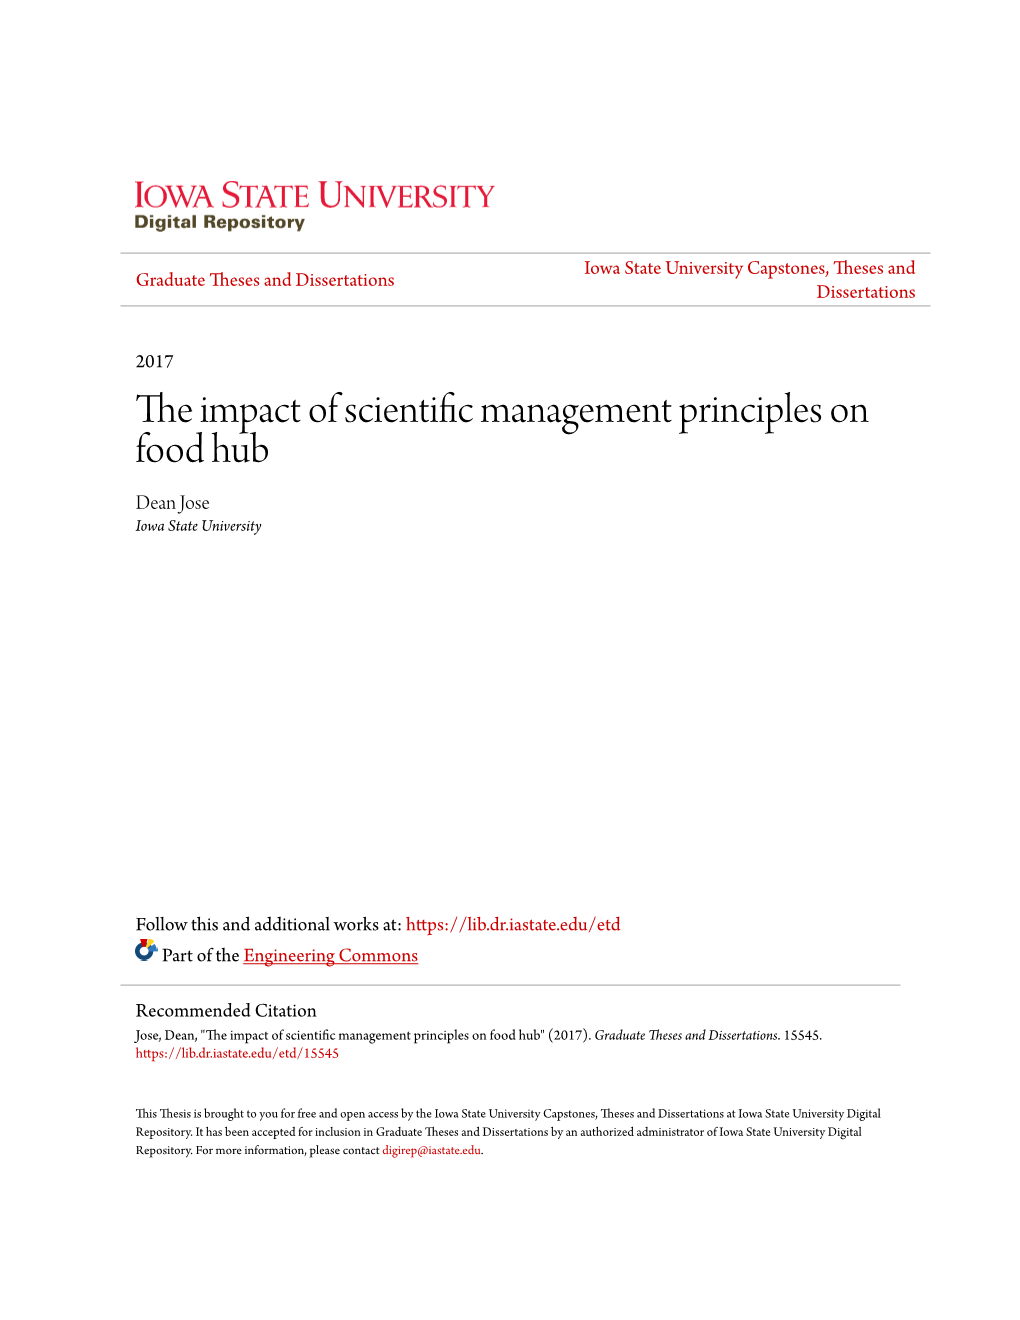 The Impact of Scientific Management Principles on Food Hub